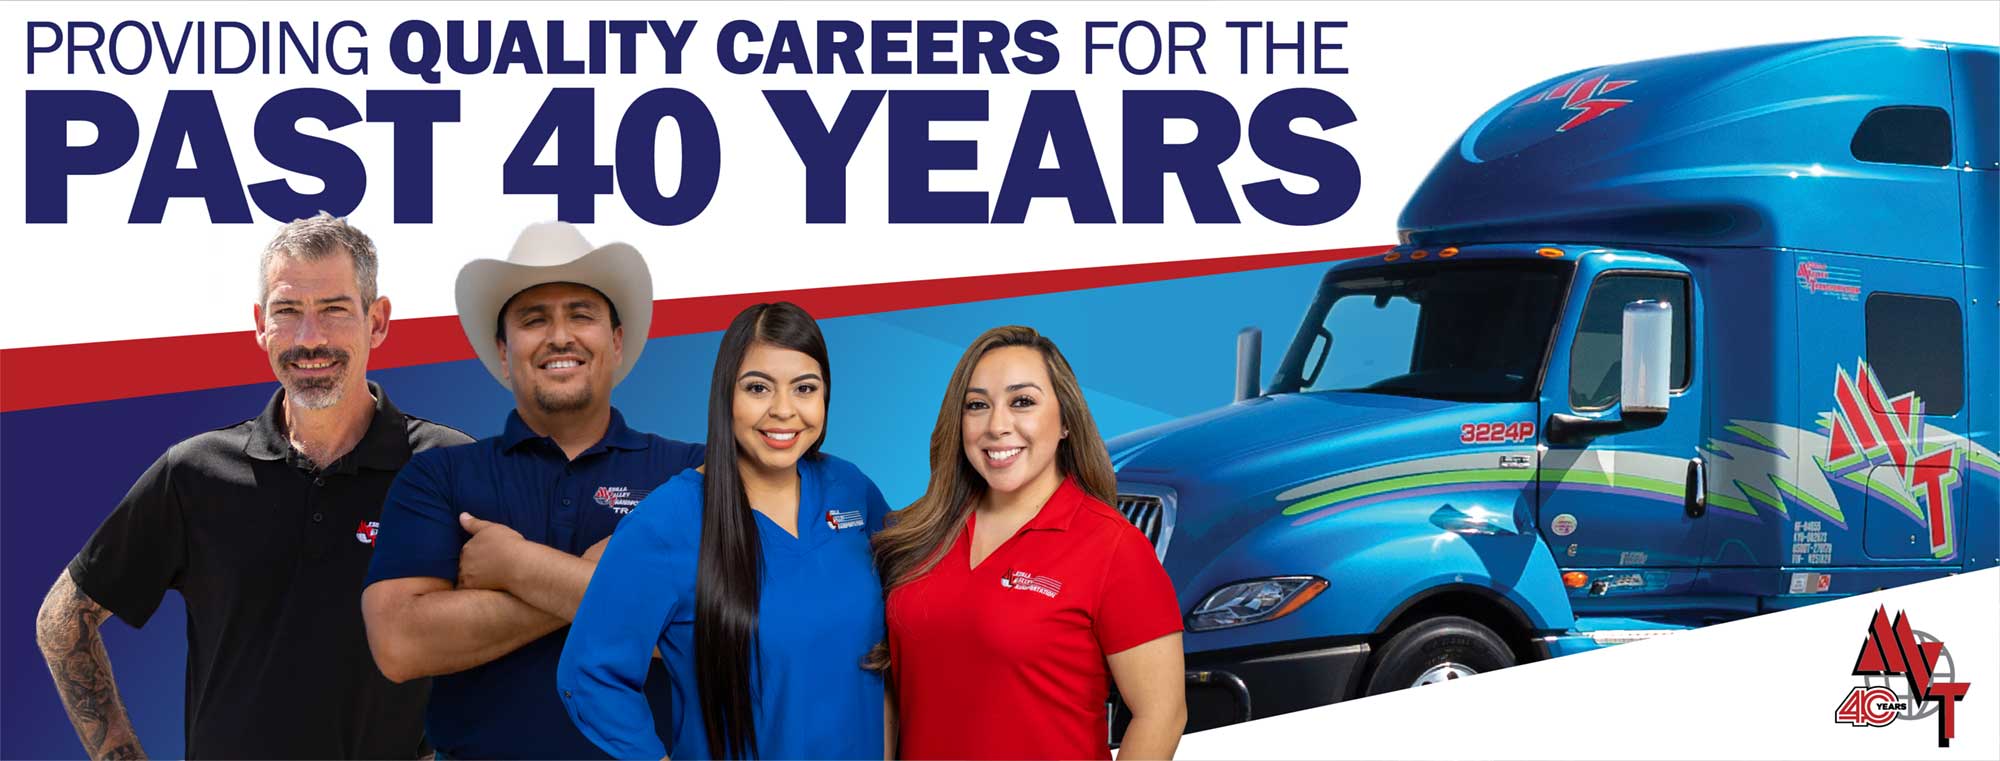 MVT Providing Quality Careers for the Past 40 Years Banner